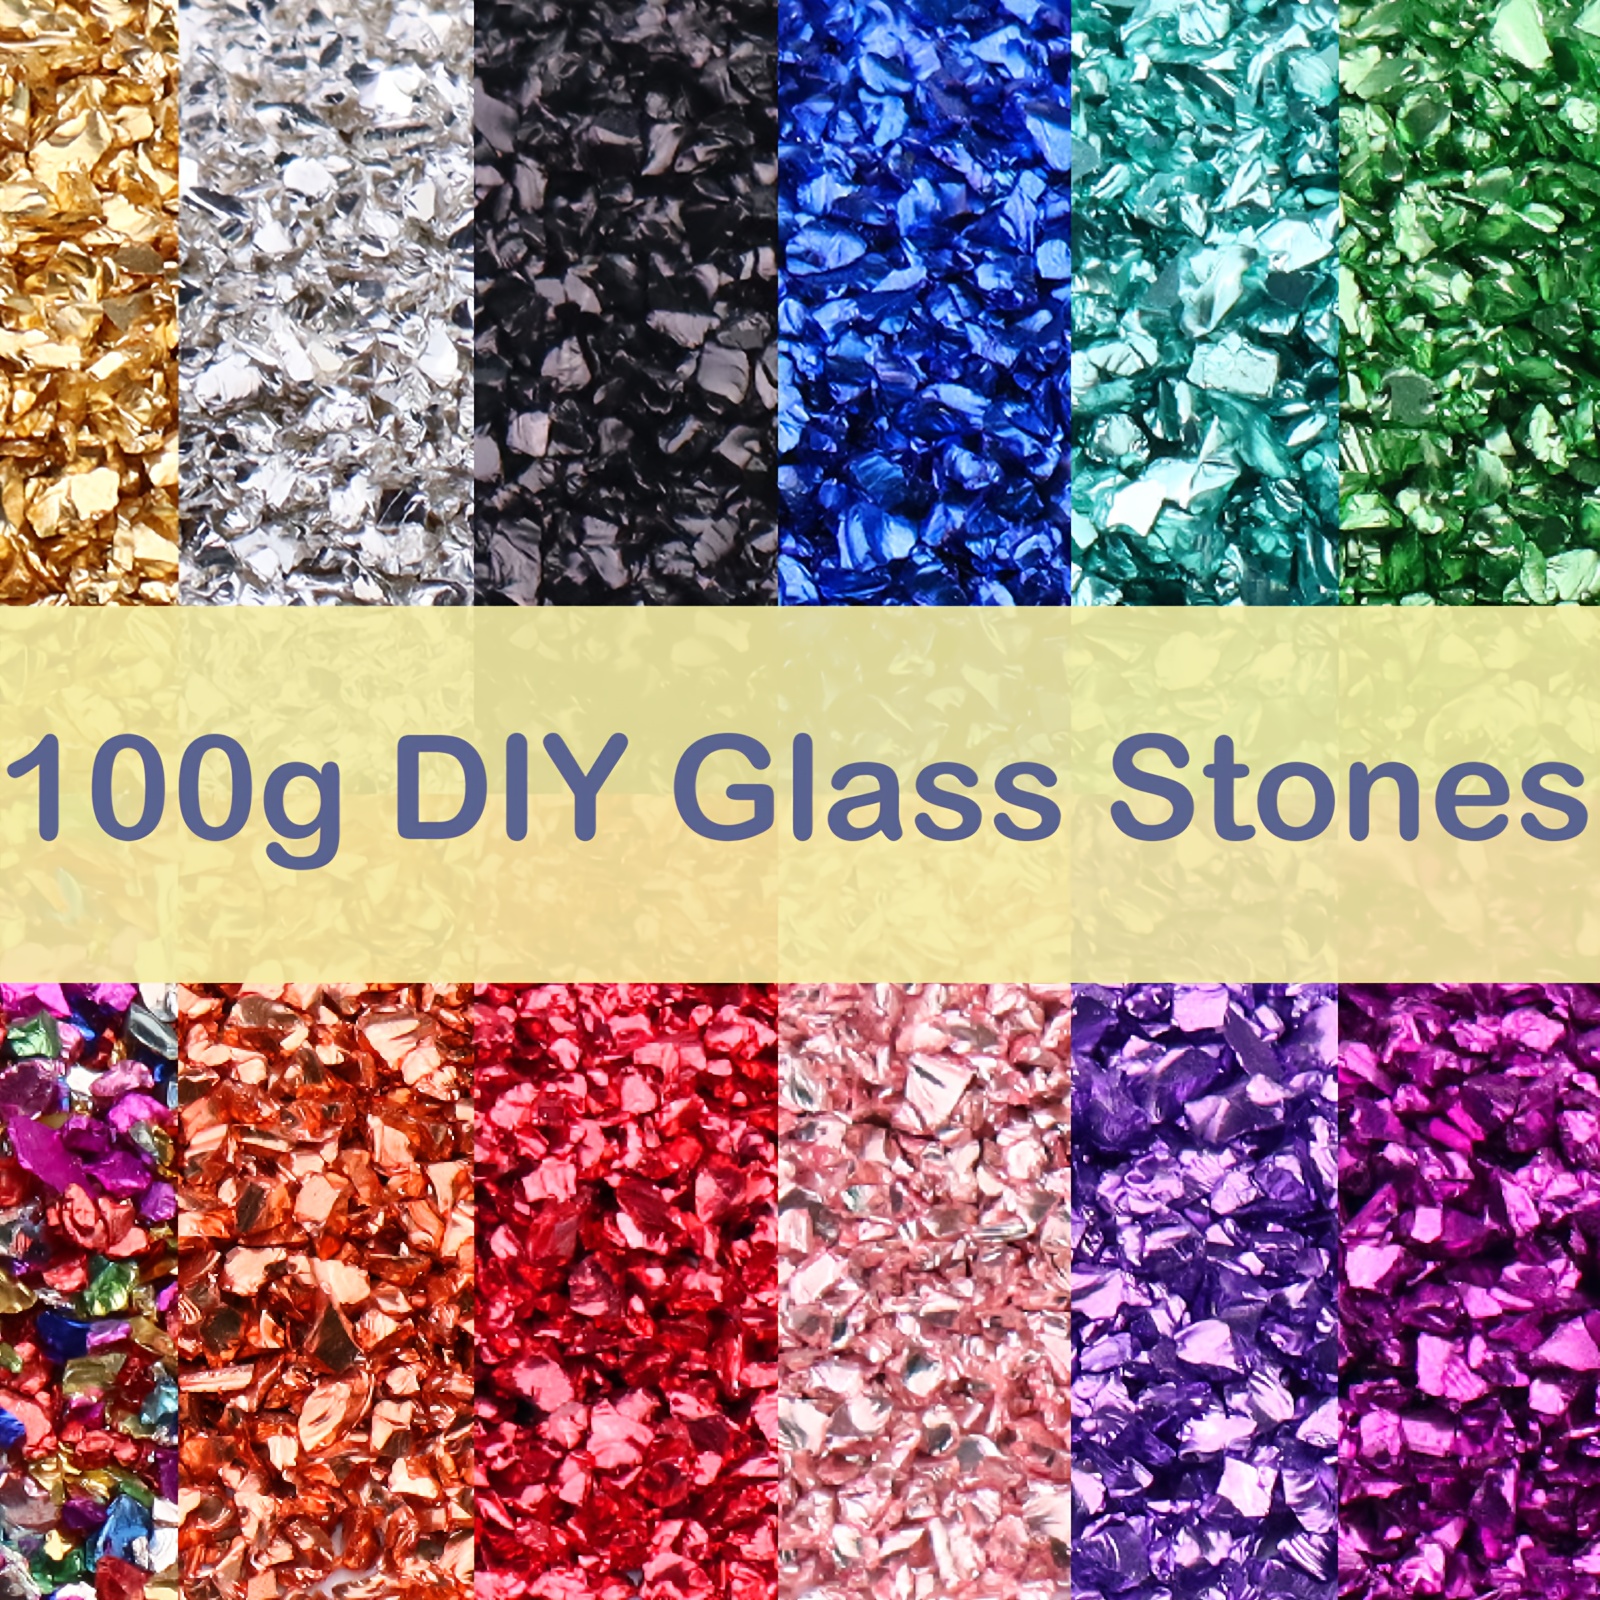 

1 Pack 100g/3.53oz Crushed Glass Stone, Vase Filler, Epoxy Resin Molds, Jewelry Making, Diy Crafts Decoration